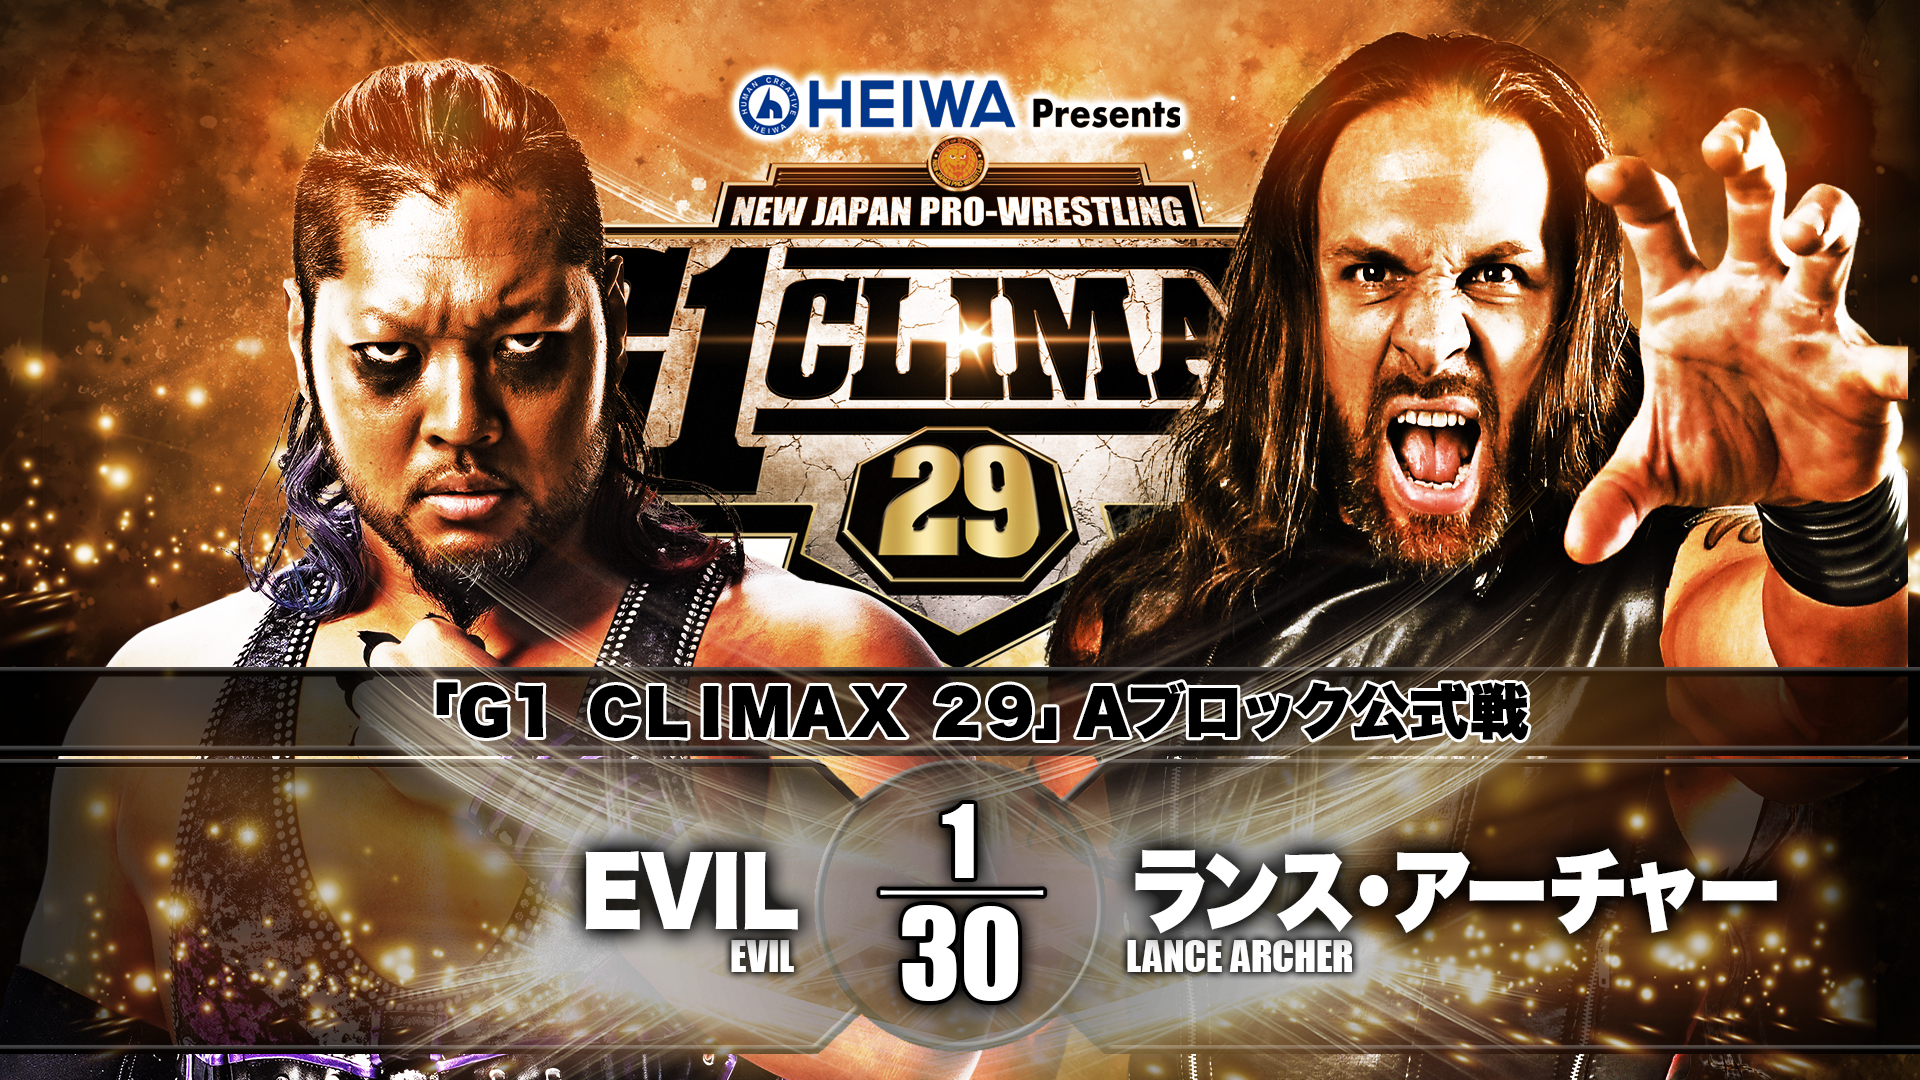 Match order revealed for G1 Climax 29 night 17 in the Budokan 